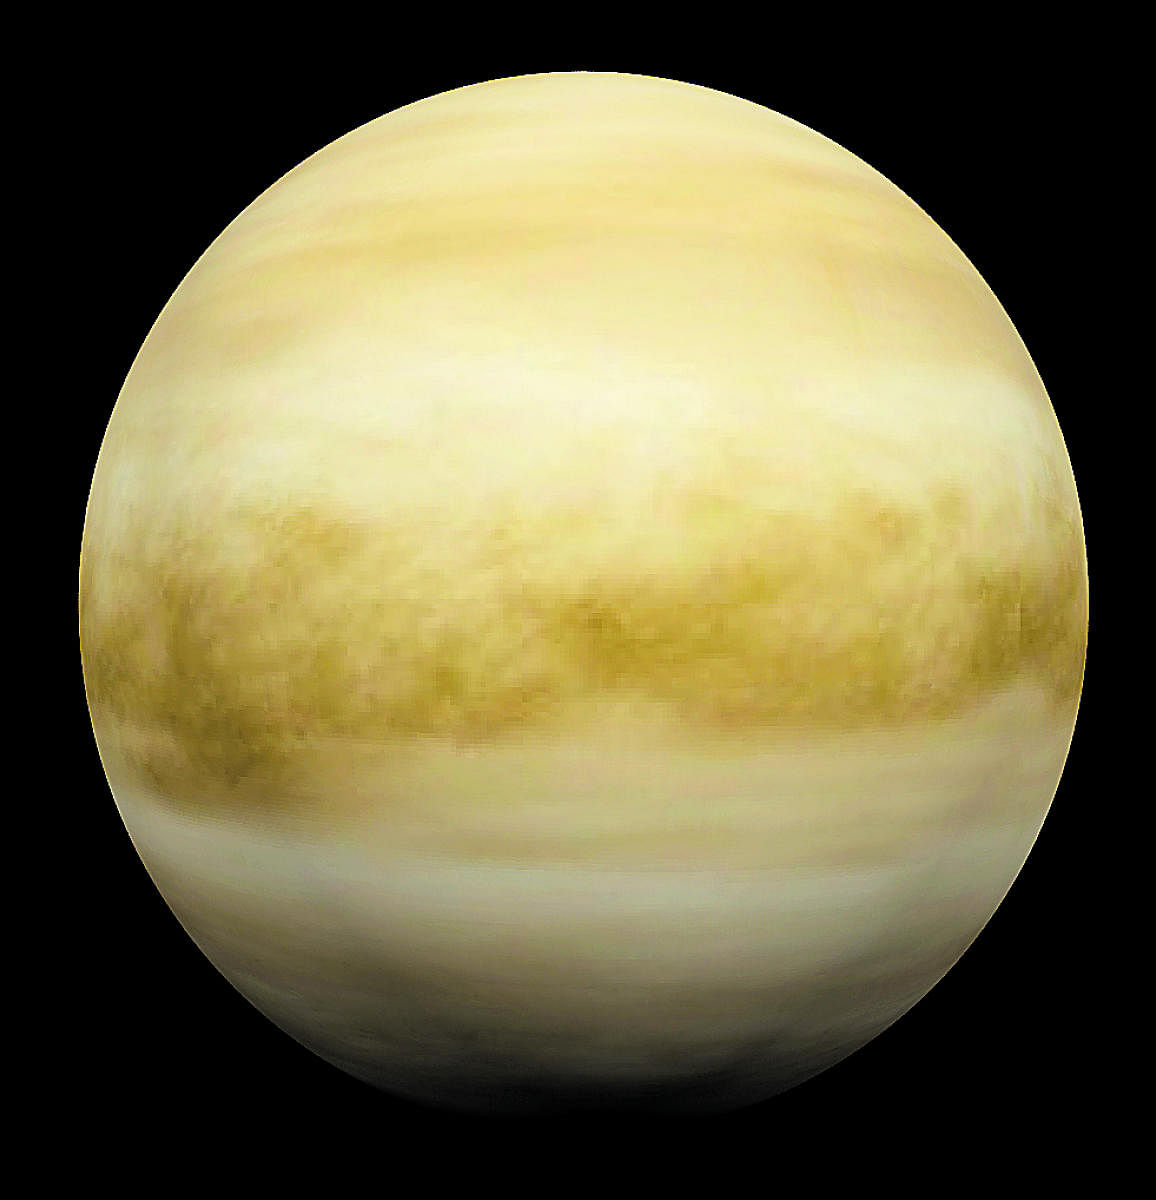 The research gives a new view of Venus's climatic history and may have implications for the habitability of exoplanets in similar orbits.